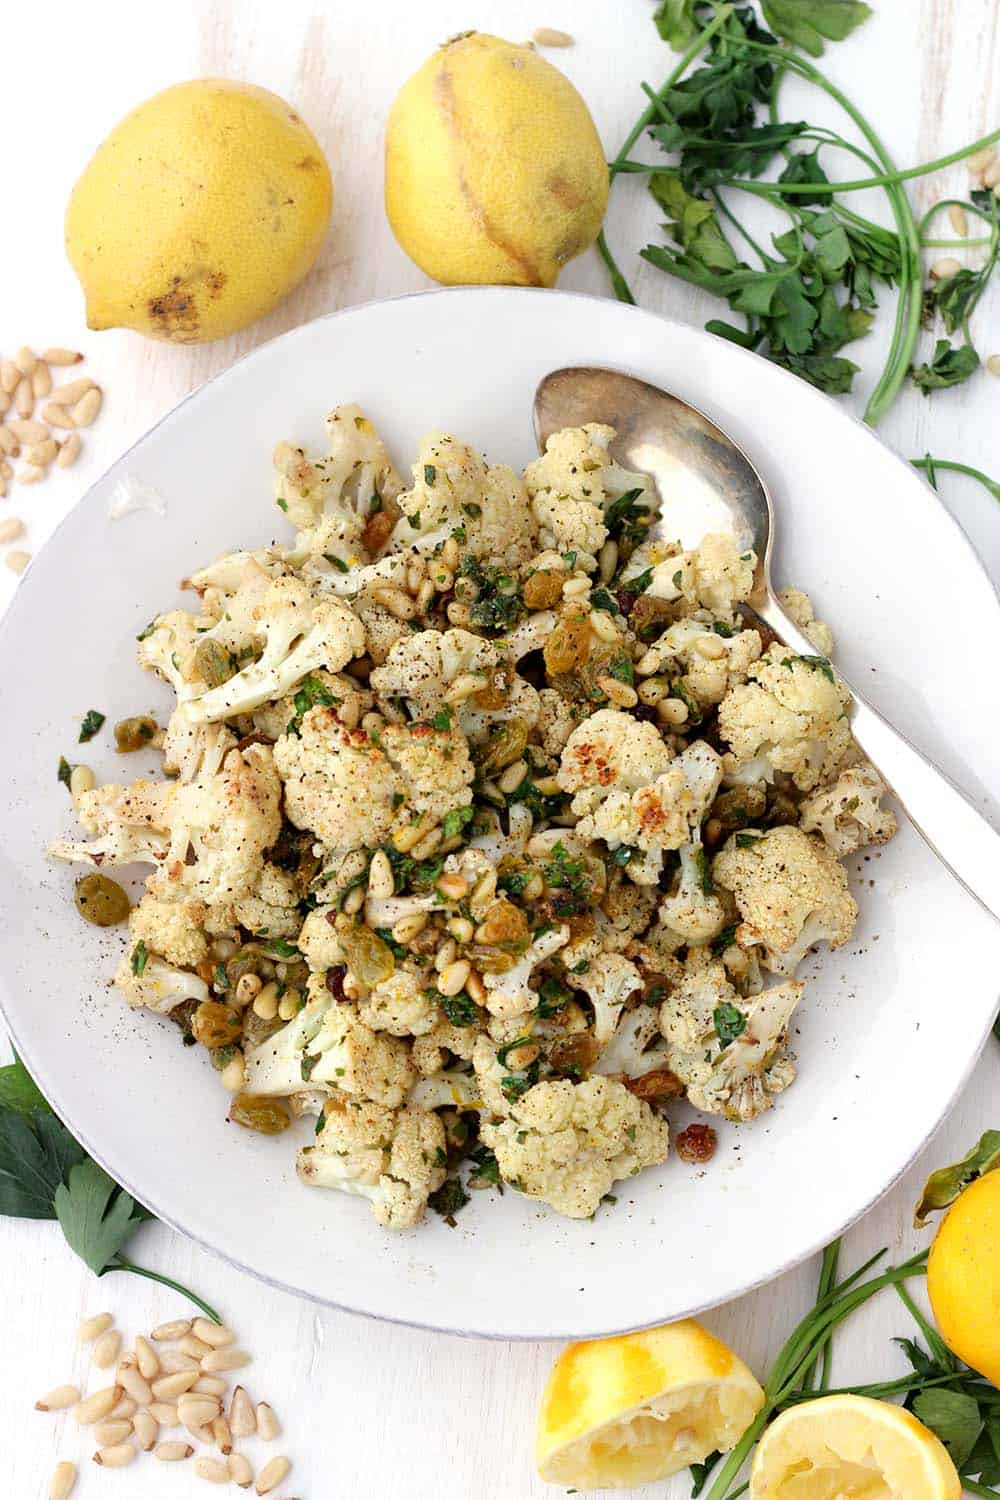 A bowl of roasted cauliflower with pine nuts and raisins.